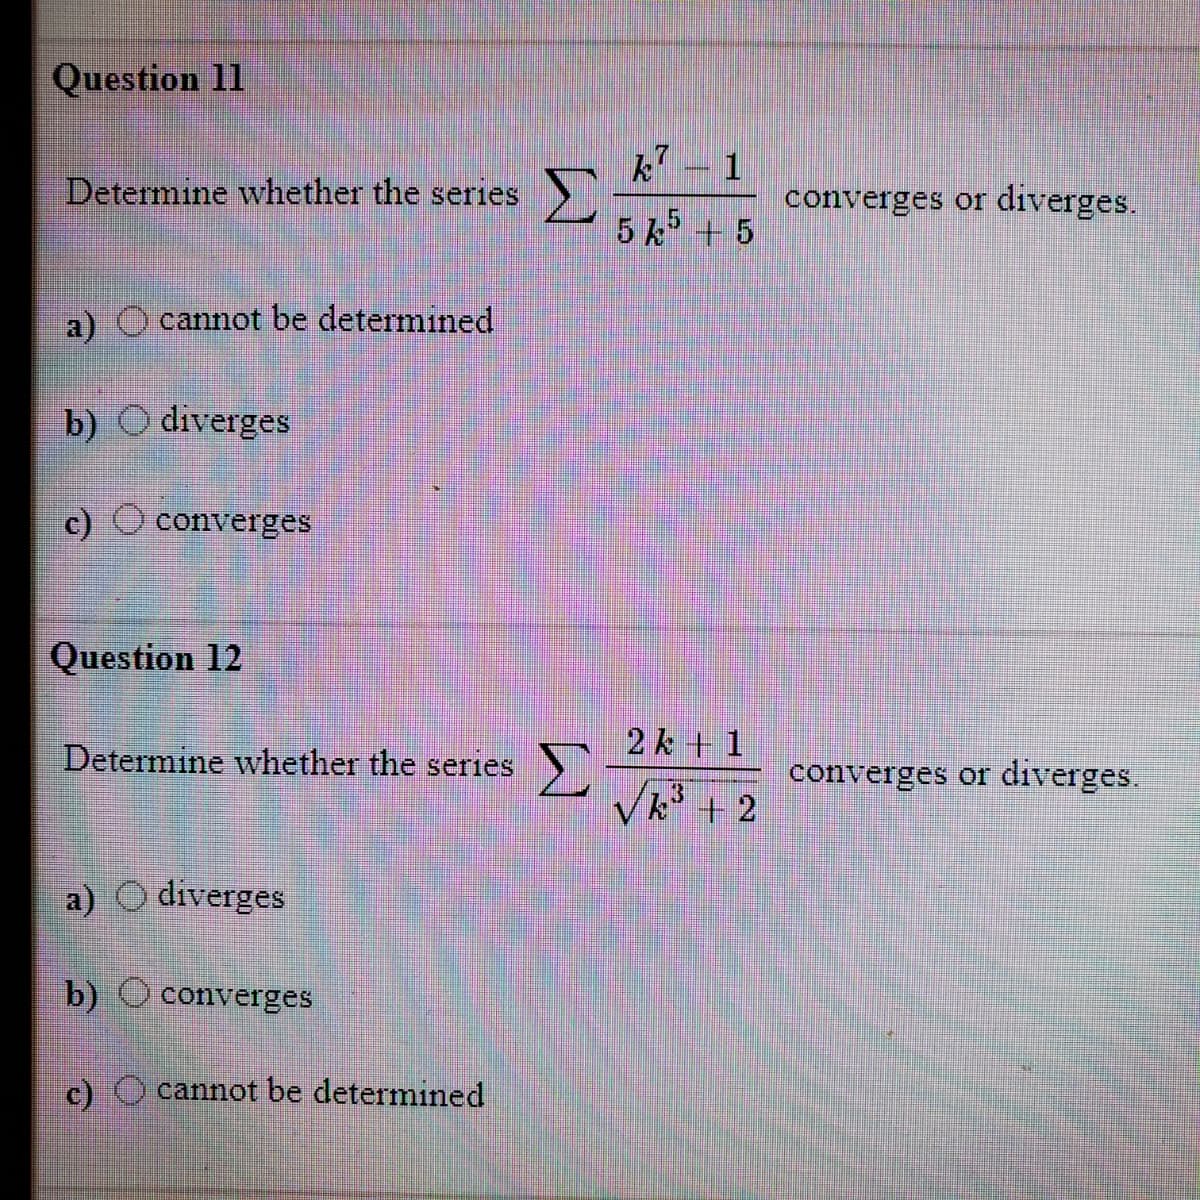 Question 11
k- 1
Determine whether the series
converges or diverges.
5 k + 5
a)
cannot be determined
b)
O diverges
c) O converges
Question 12
2 k + 1
Σ
Vk + 2
Determine whether the series
converges or diverges.
a) O diverges
b) O converges
c) cannot be determined
